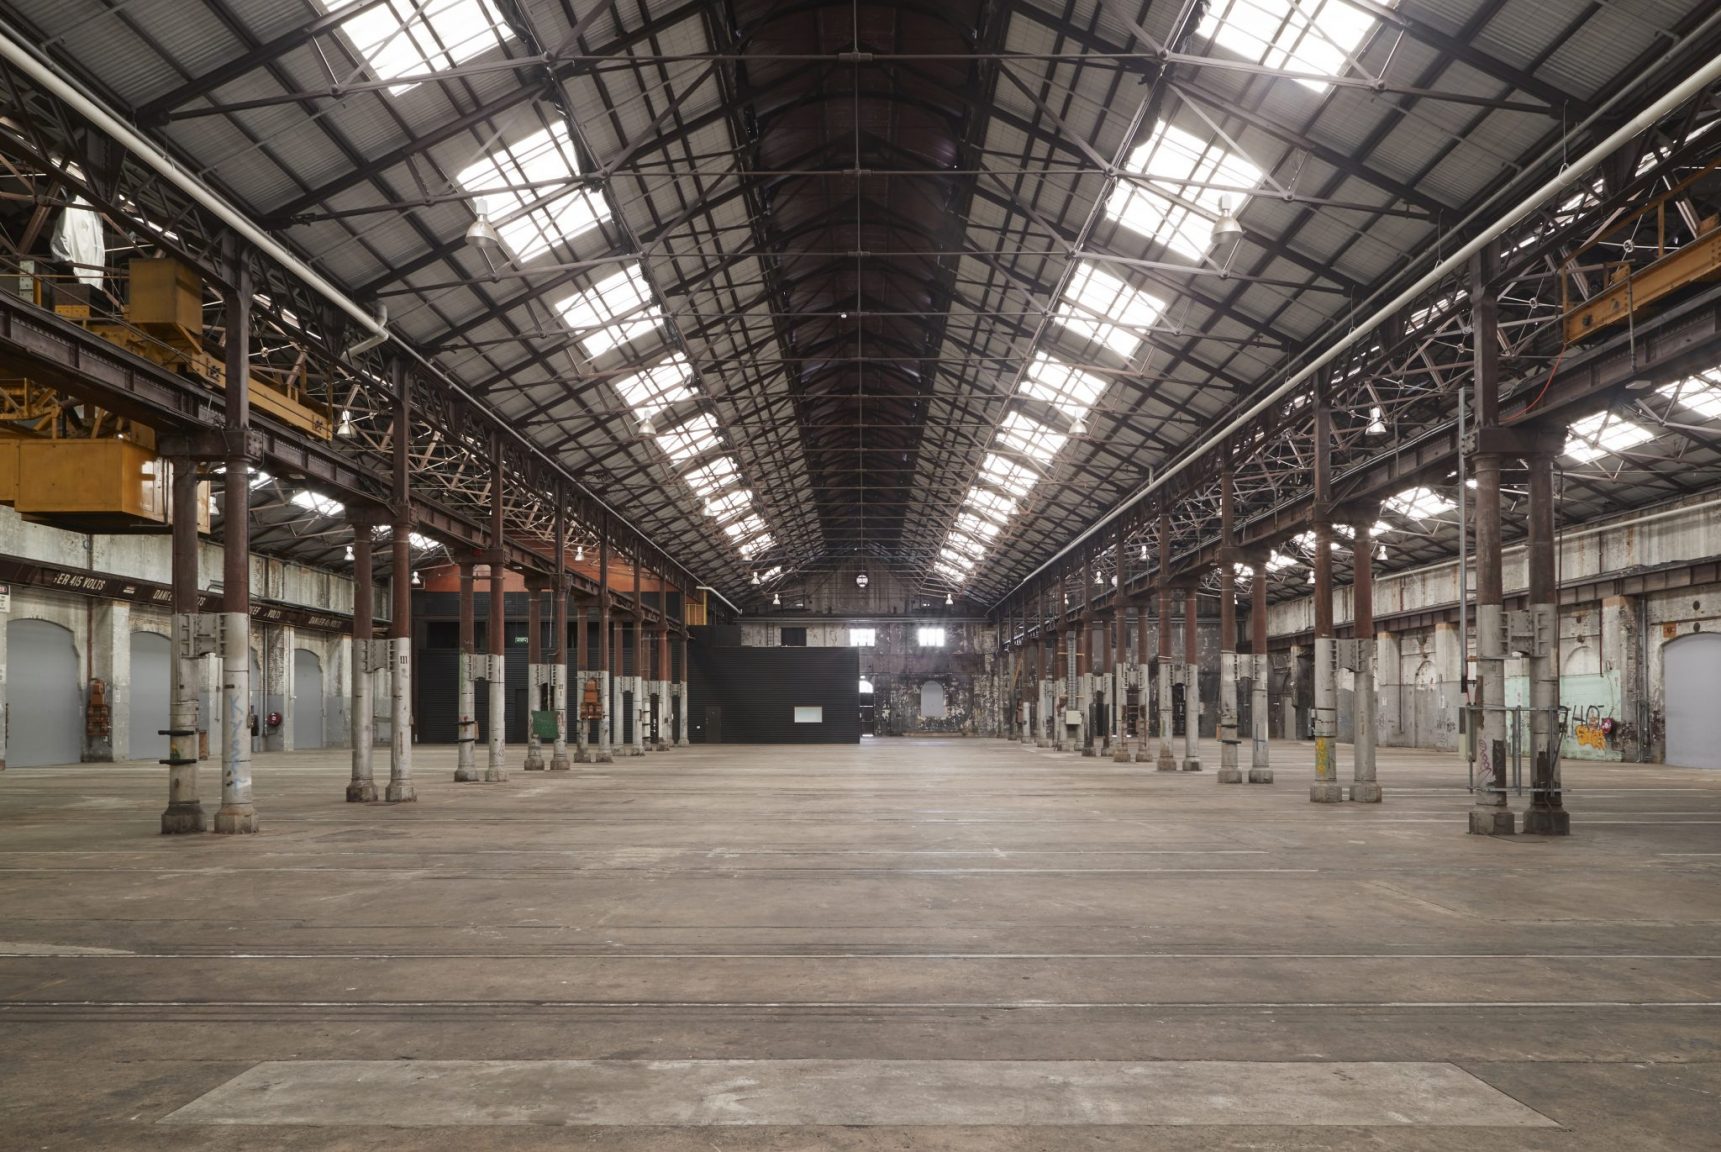 Gallery Space, Venue Hire, Carriageworks